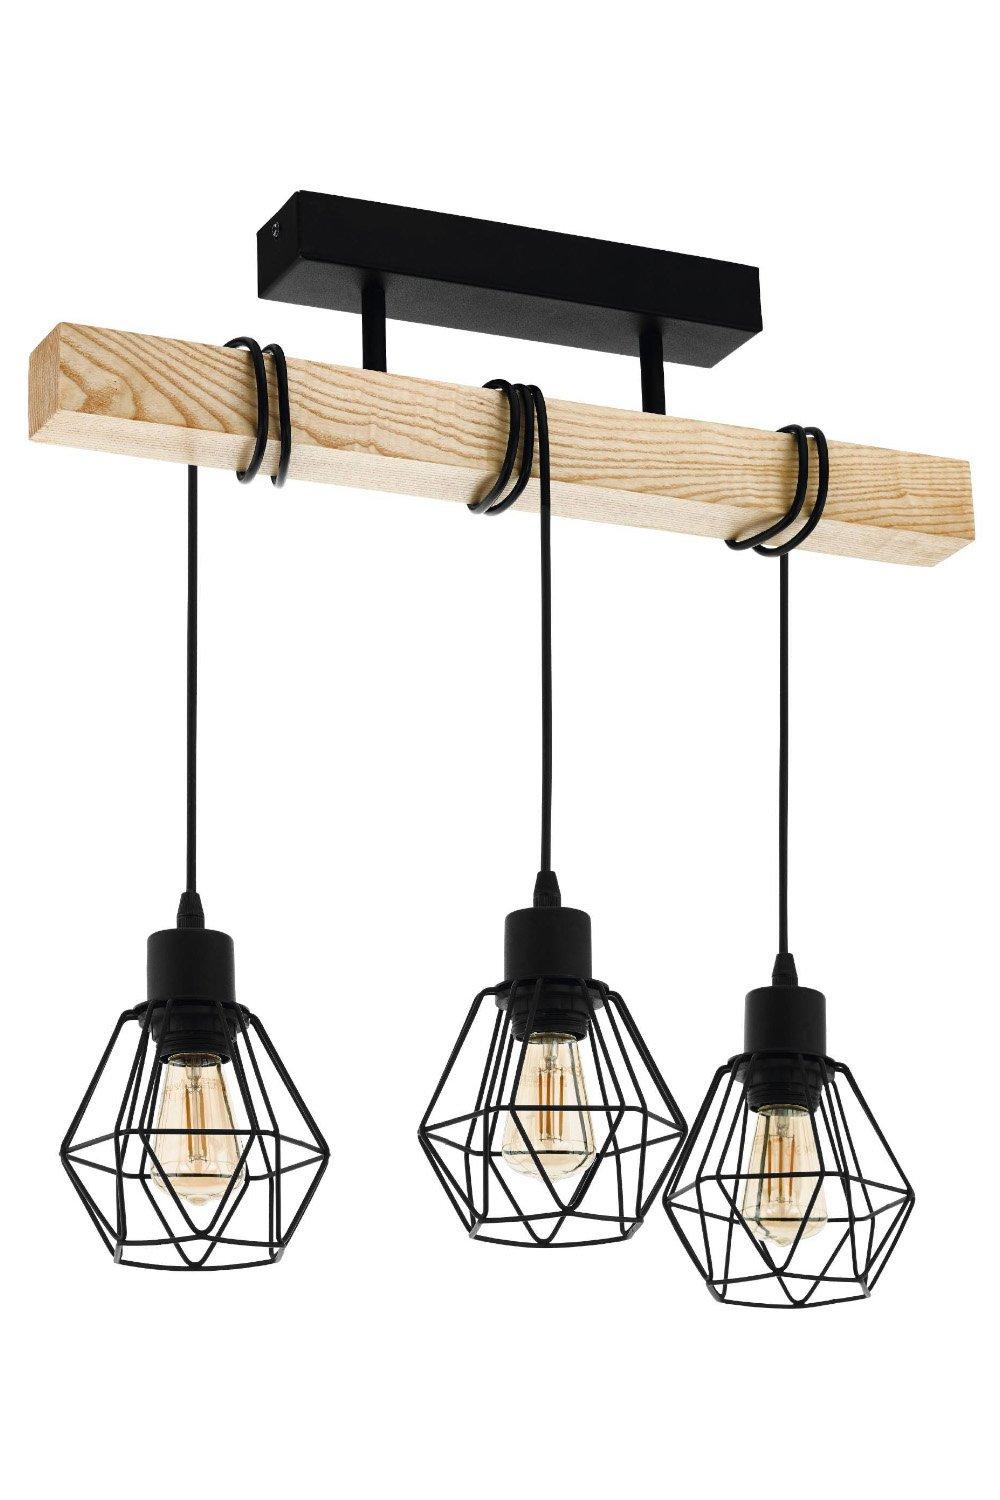 Townshend Natural Wood And Metal 3 Light Ceiling Pendant